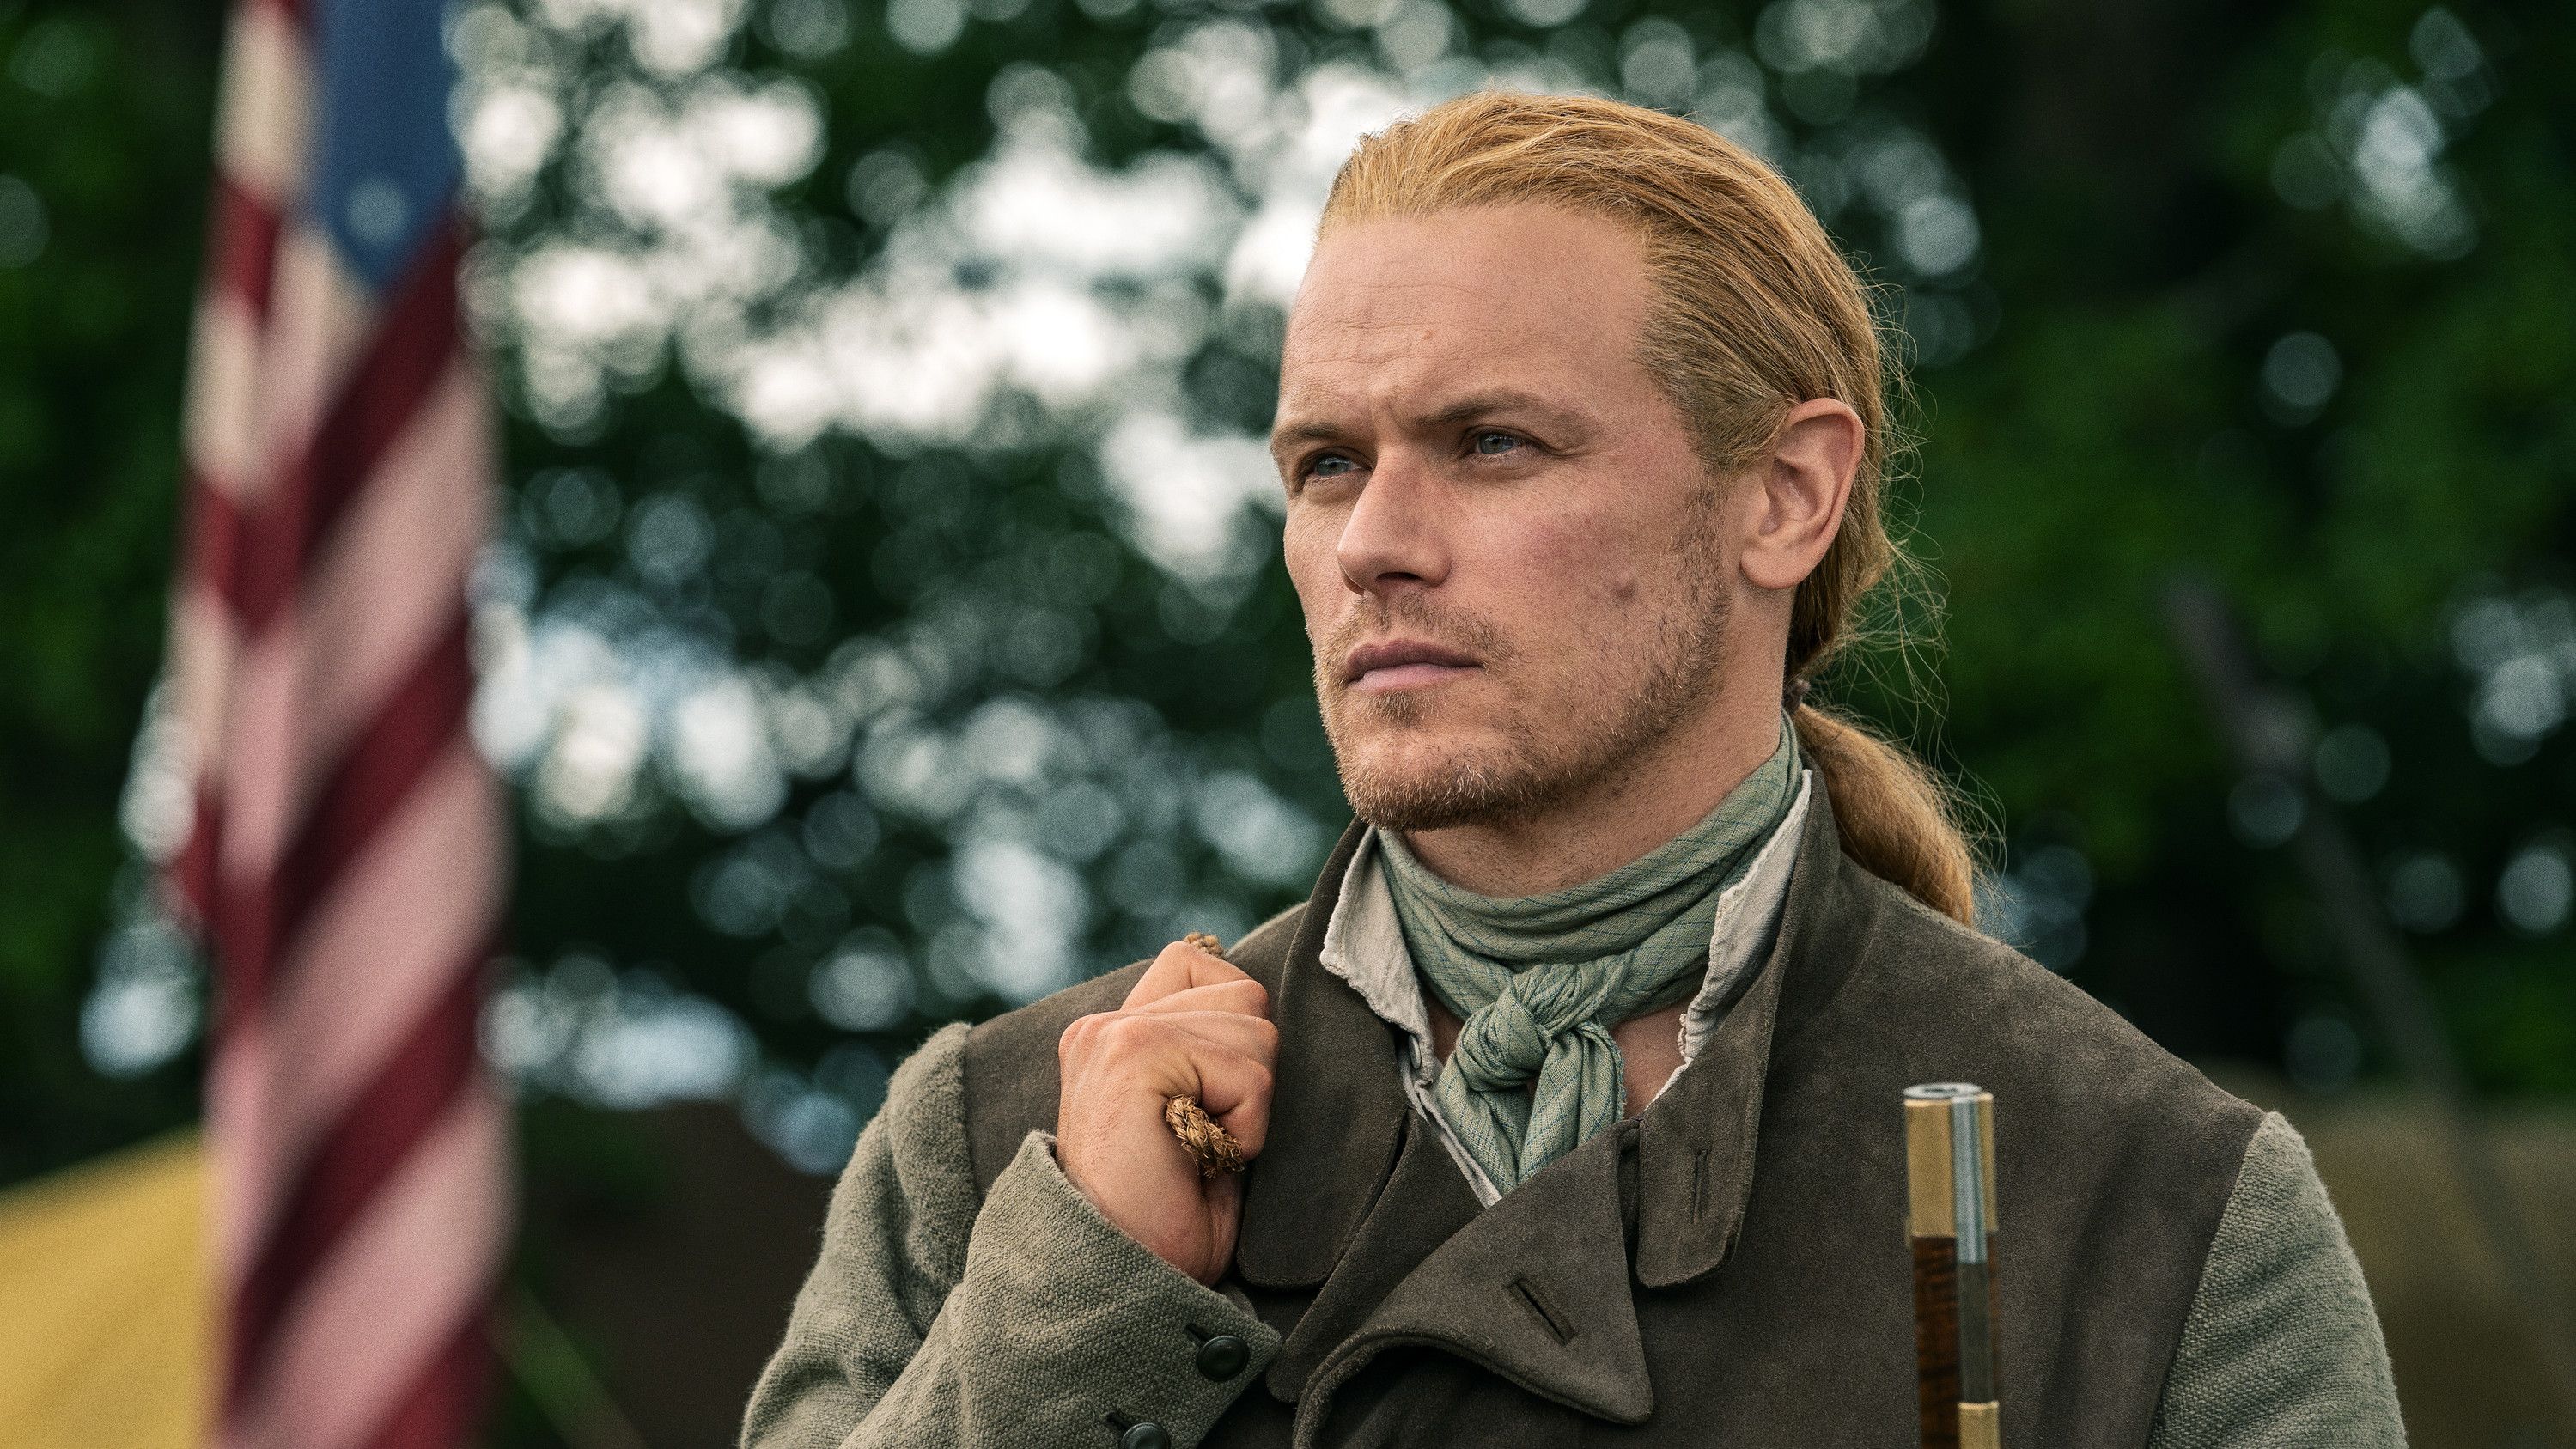 Outlander' Fans, Sam Heughan Just Dropped a Major New Clue About Season 8